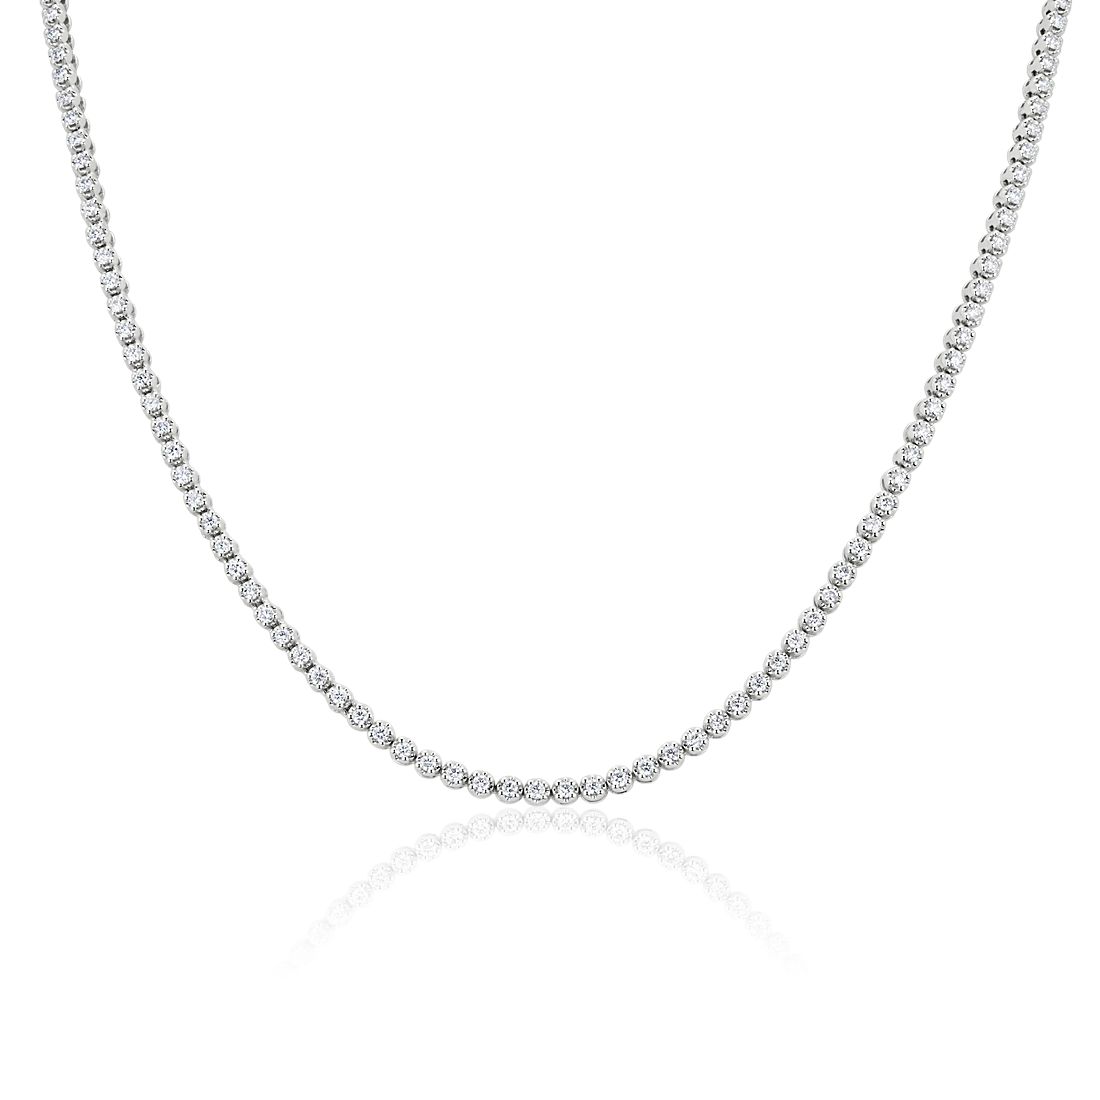 Straight Eternity Necklace in 14k White Gold (3 ct. tw.)